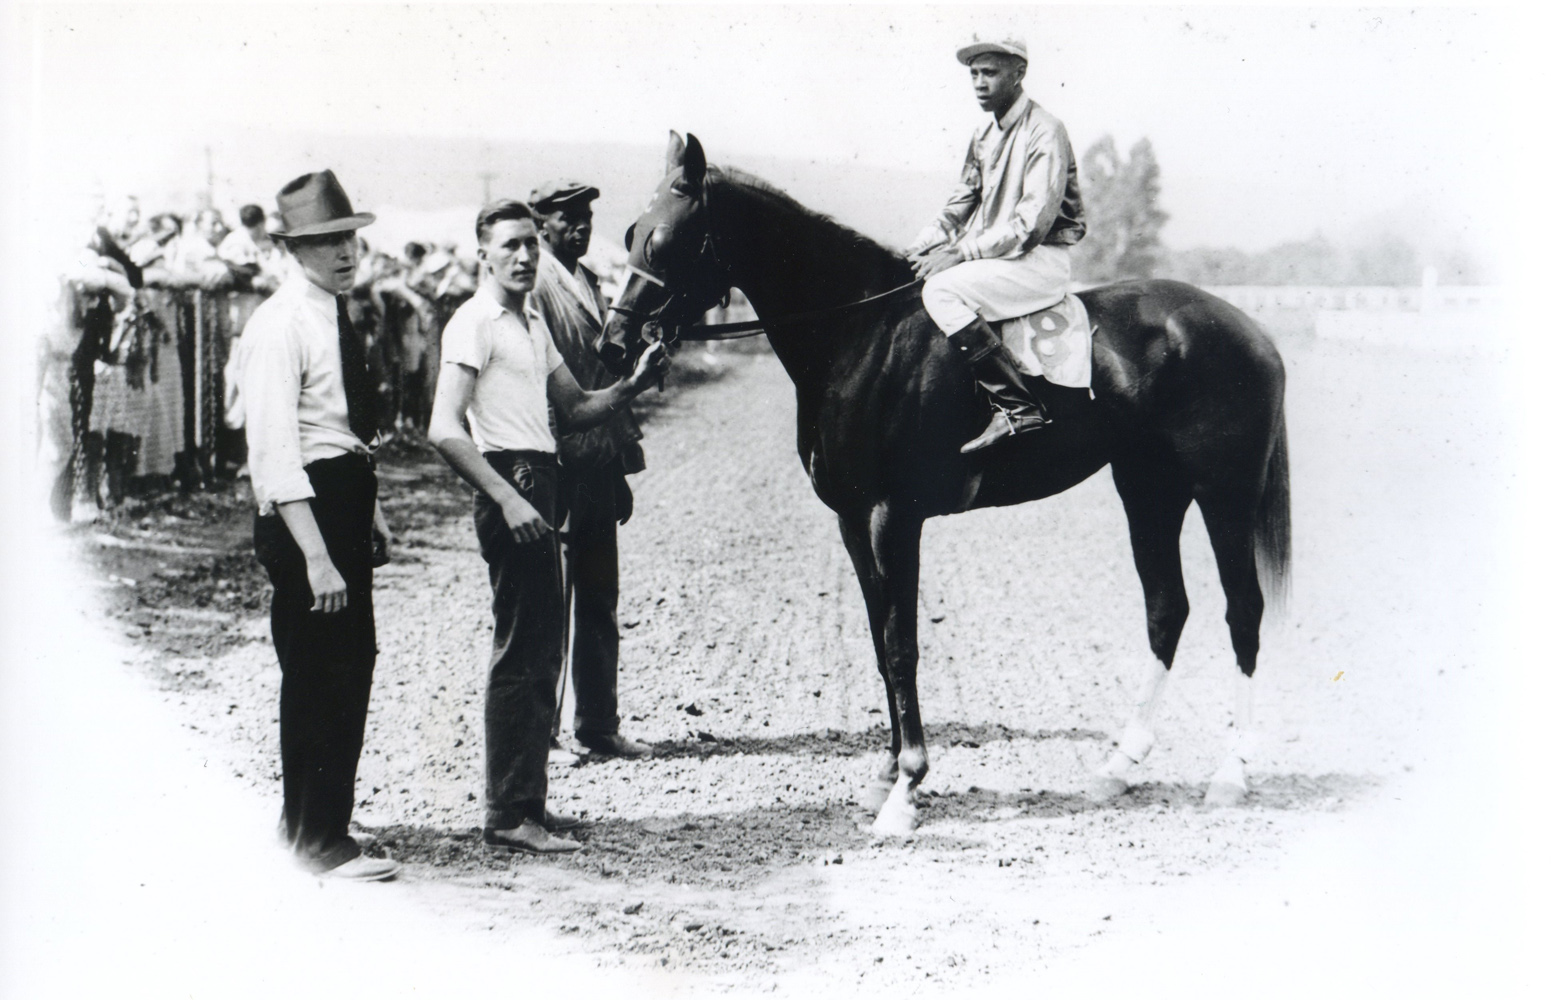 Henry Clark in the winner's circle with Opposition (R. Booker up) at Cumberland Race Track in Maryland, August 1935 (Joe Fleisher/Museum Collection)